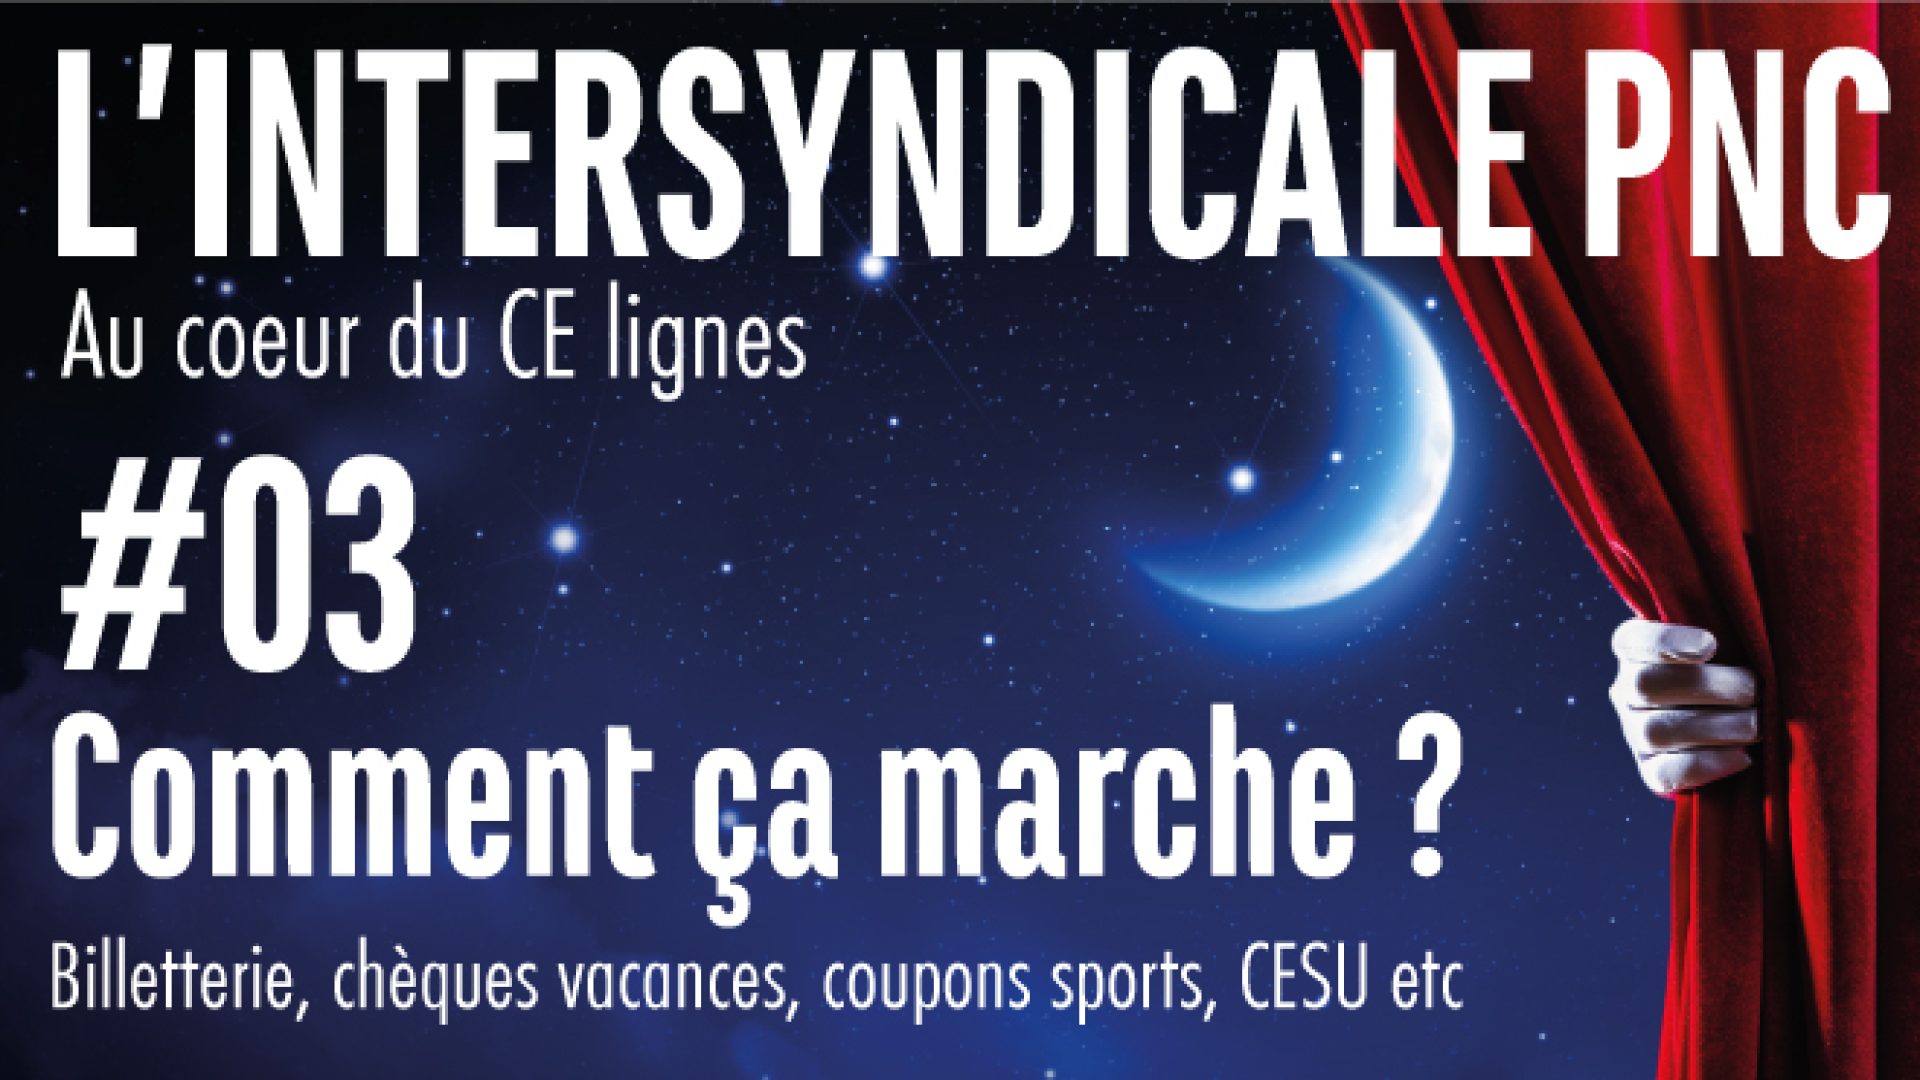 2290-cover-tract3-intersyndicale-websnpnc